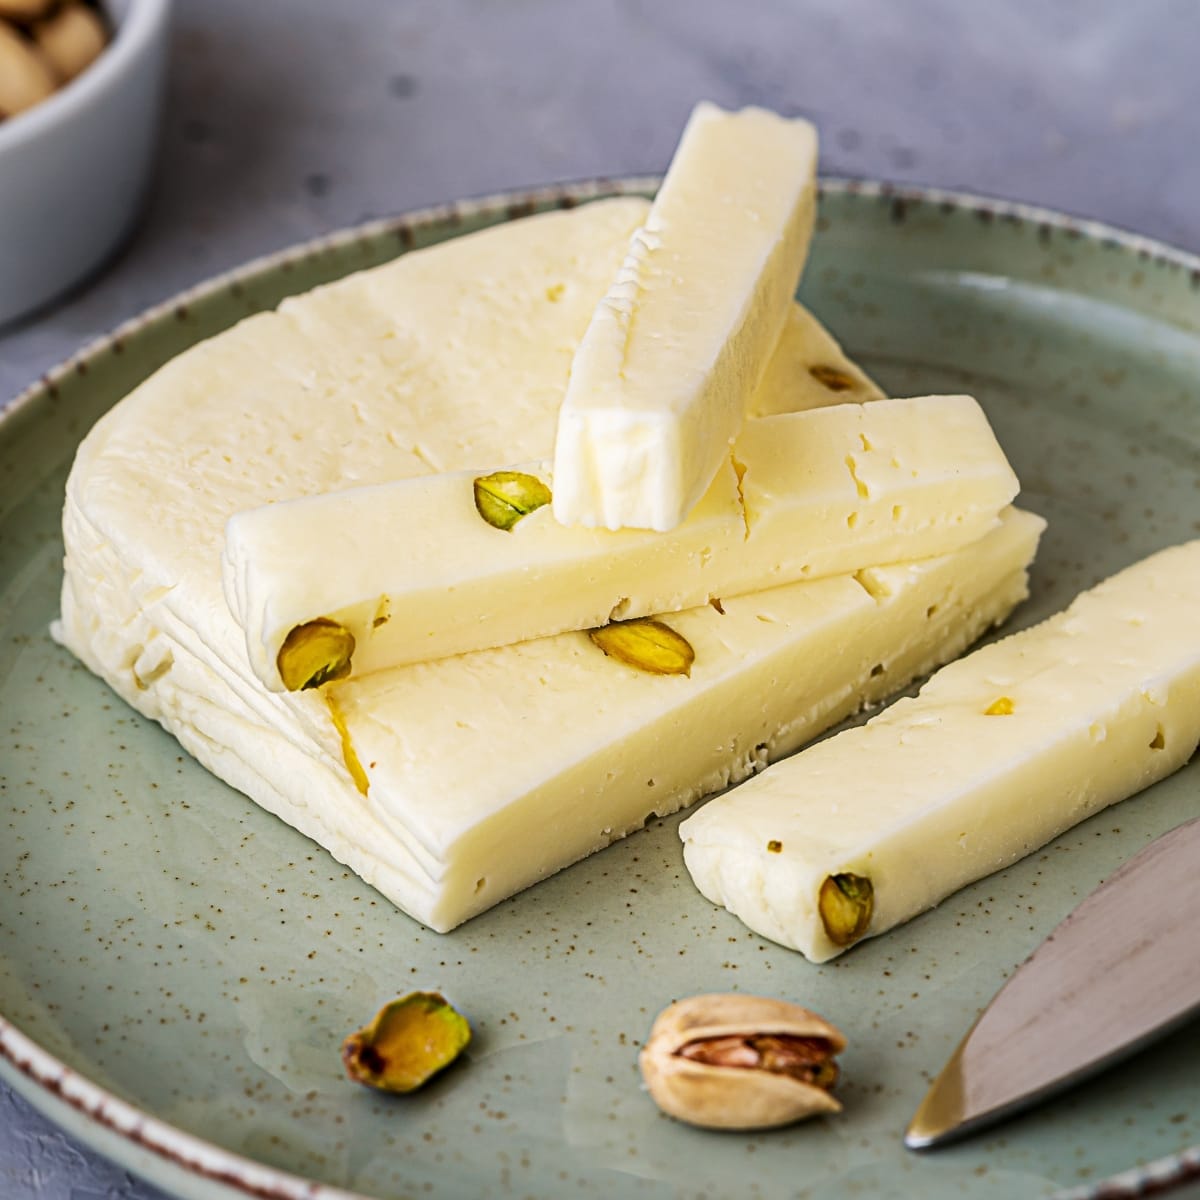 Sliced Asiago Cheese with Pistachio Nuts in a Plate